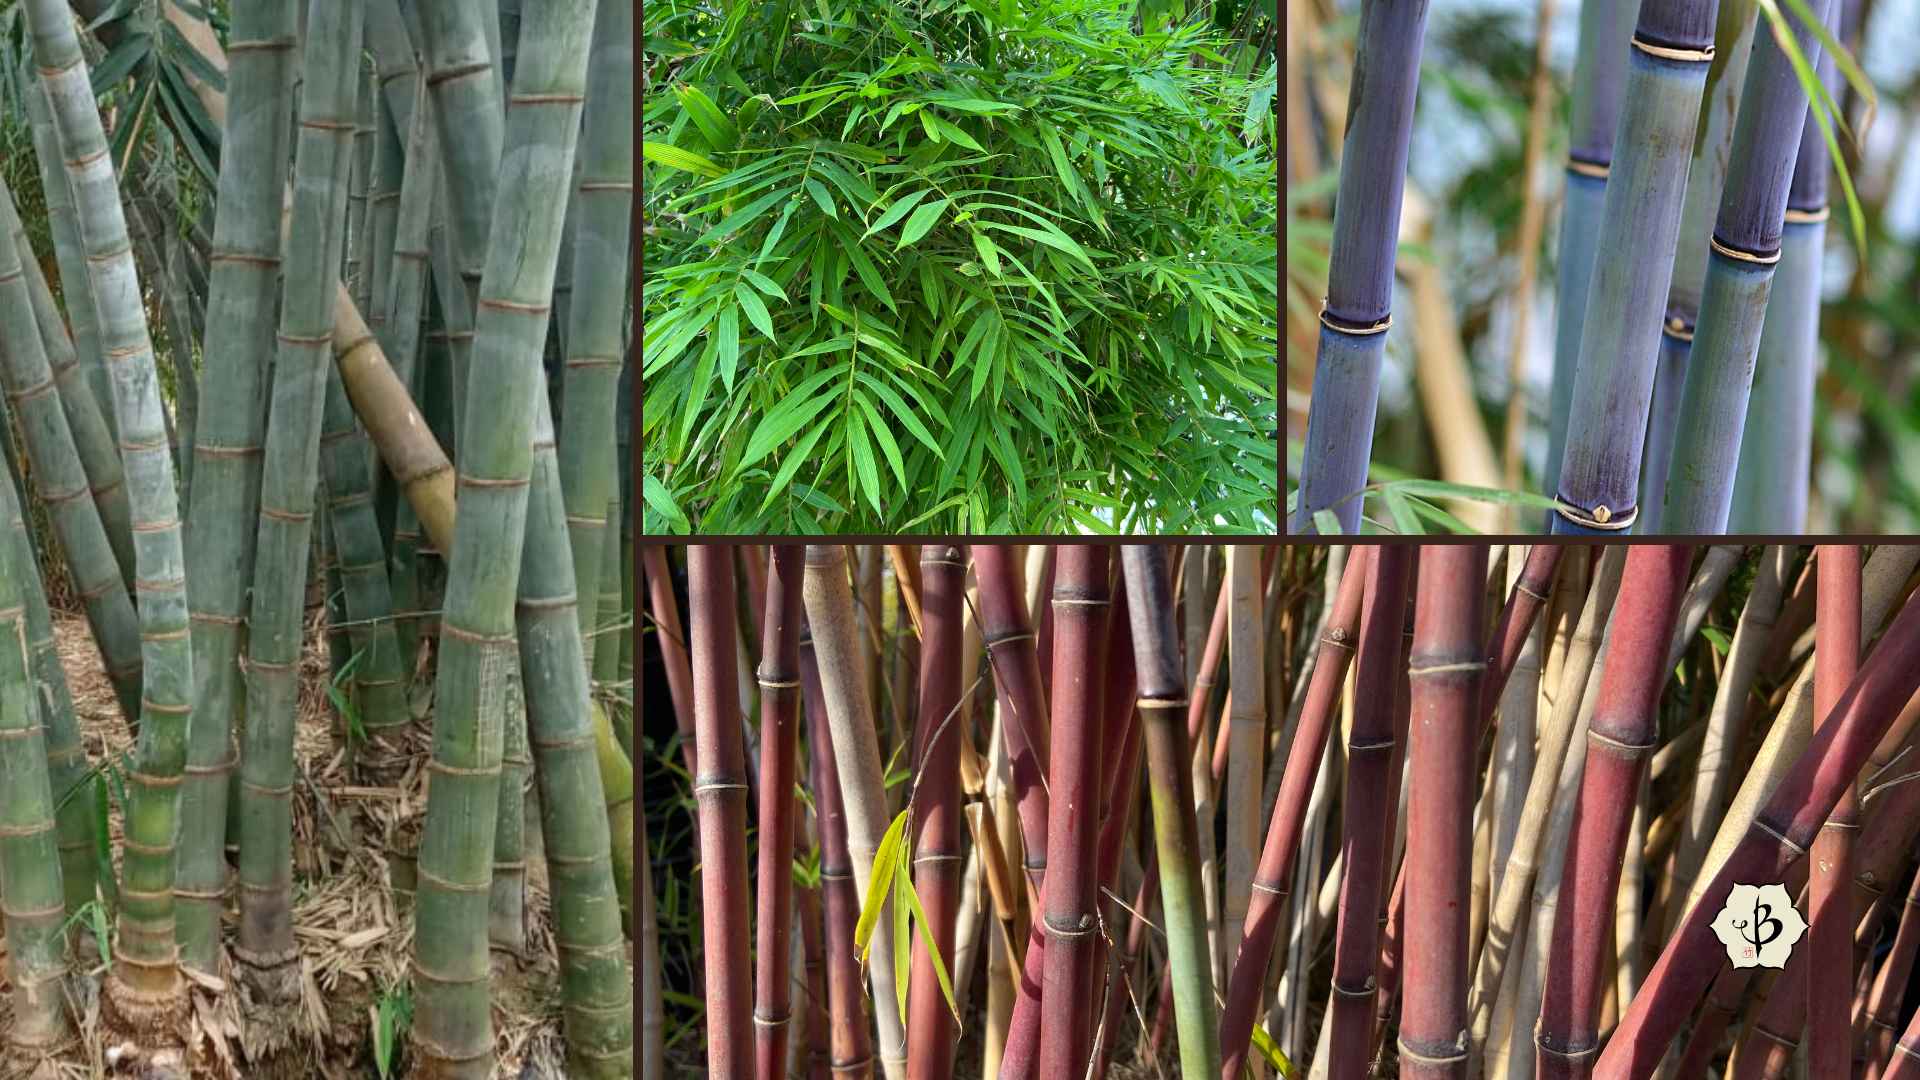 How many species of bamboo